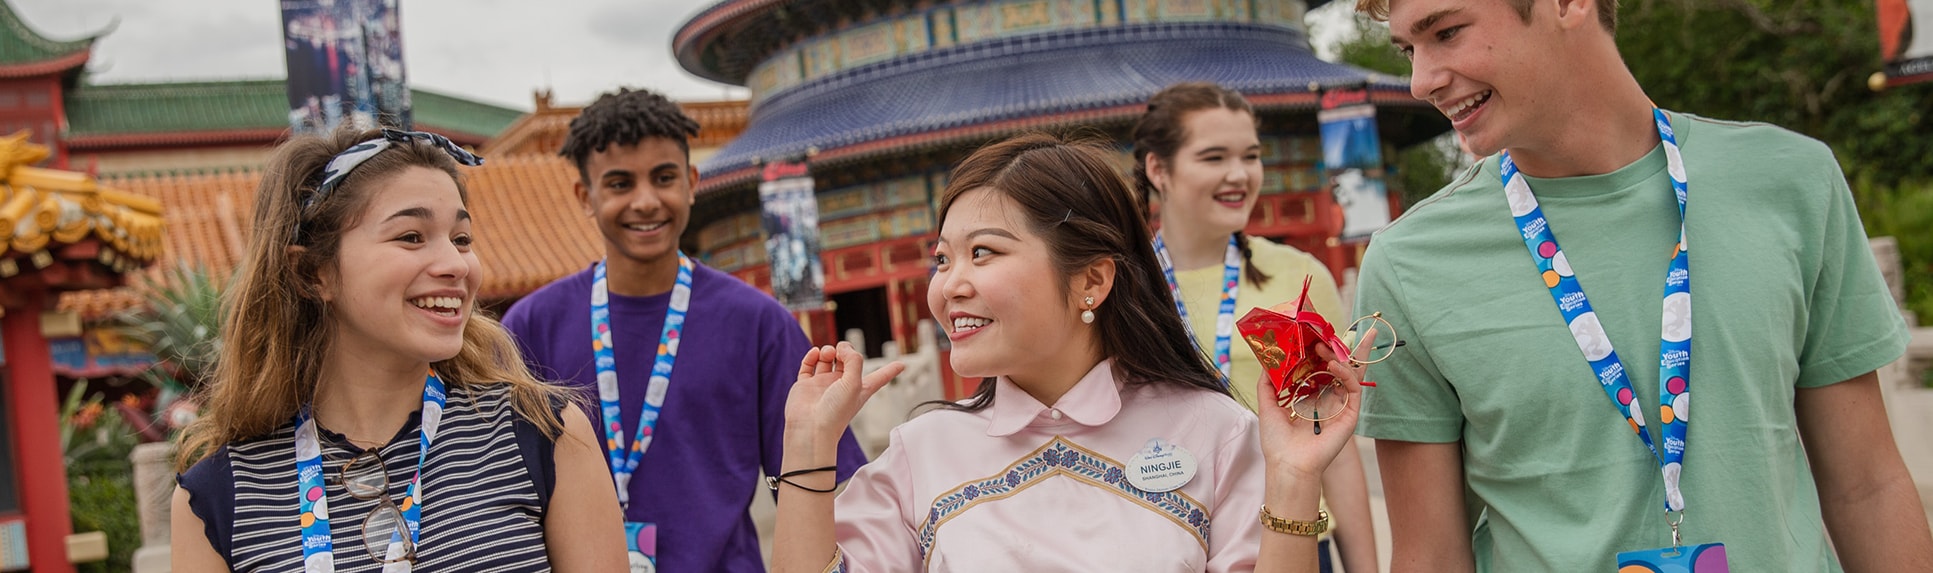 A Cast Member with a group of teenagers in front of the China Pavilion at EPCOT